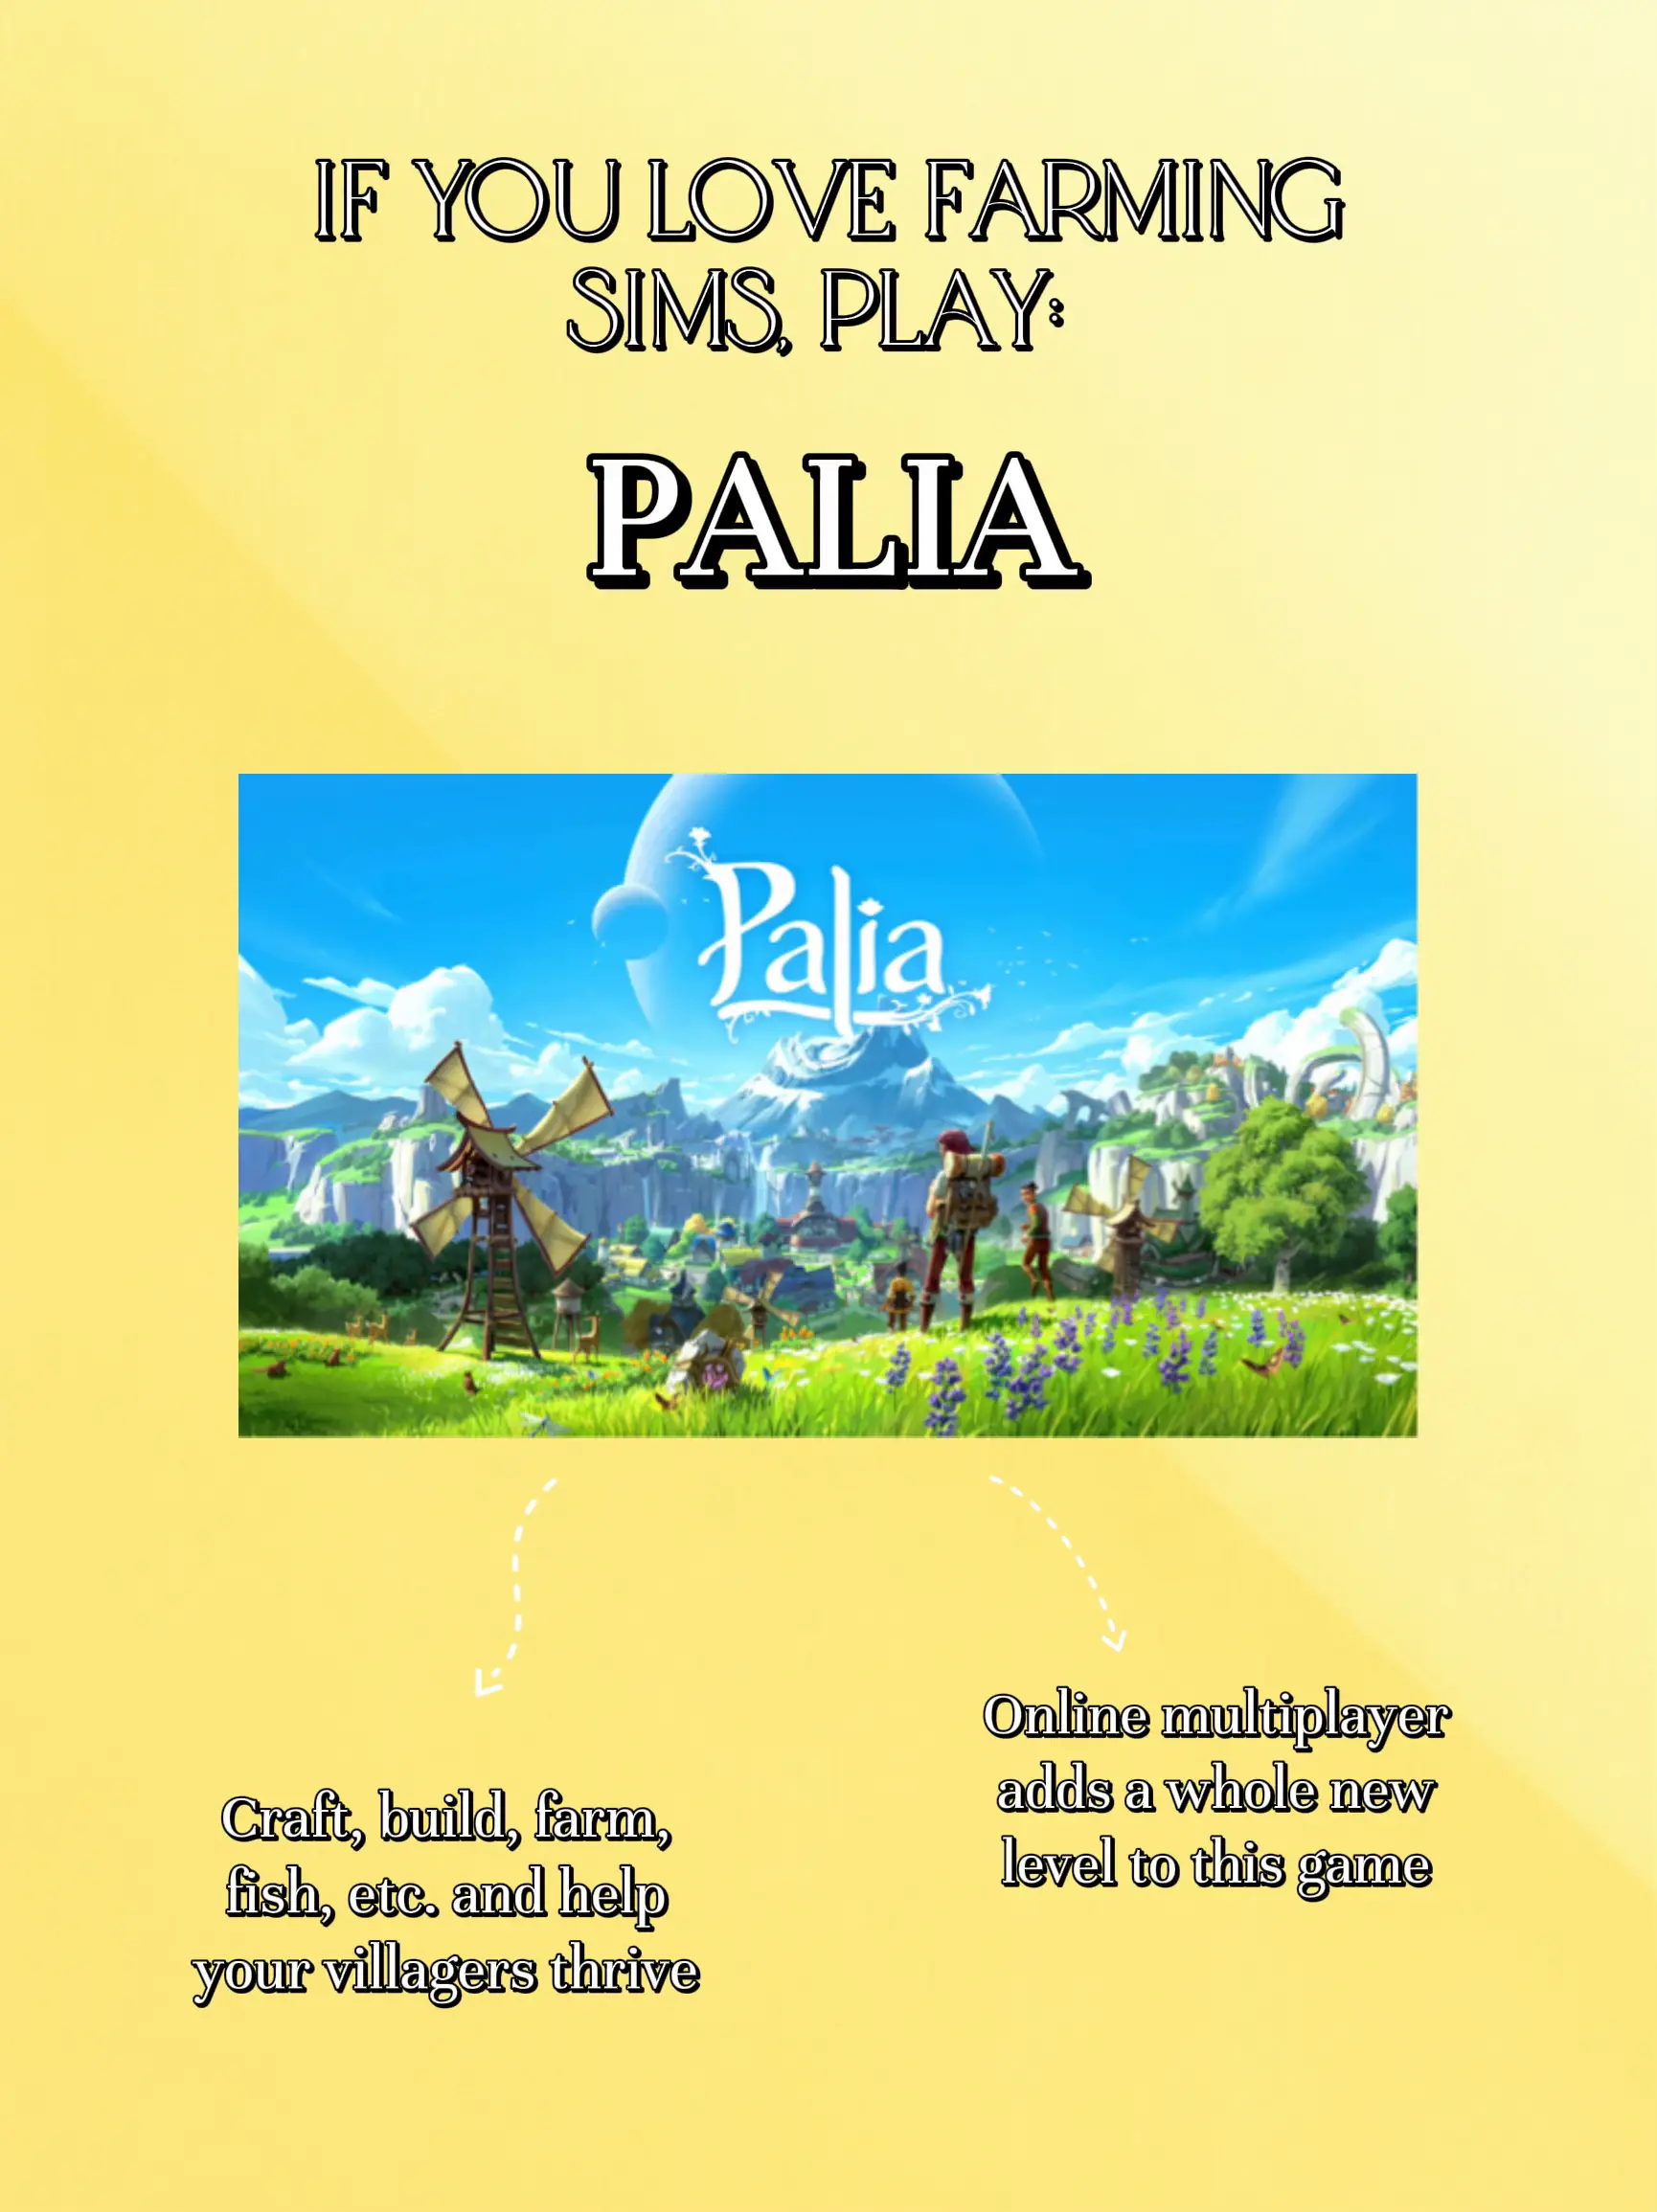 Wonder which one is harder? Rare fish or rare Flow tree? 😂 : r/Palia